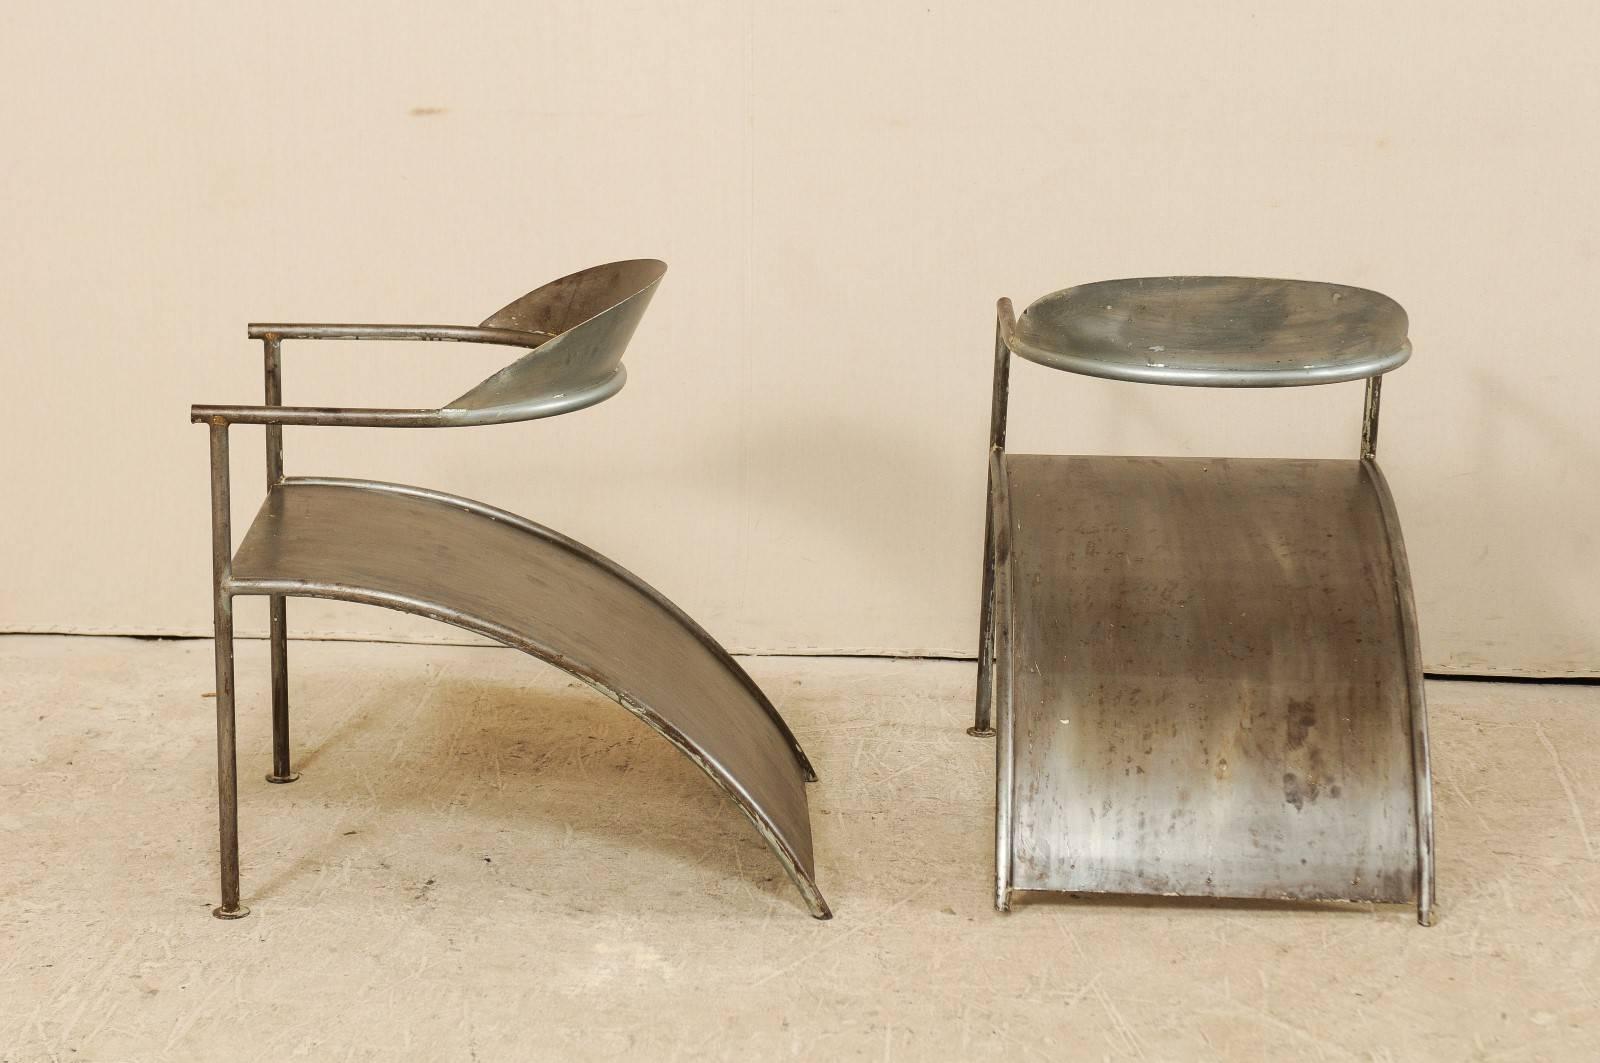 20th Century Pair of French Sleek & Modern Metal Arm Chairs by Designer Philippe Starck